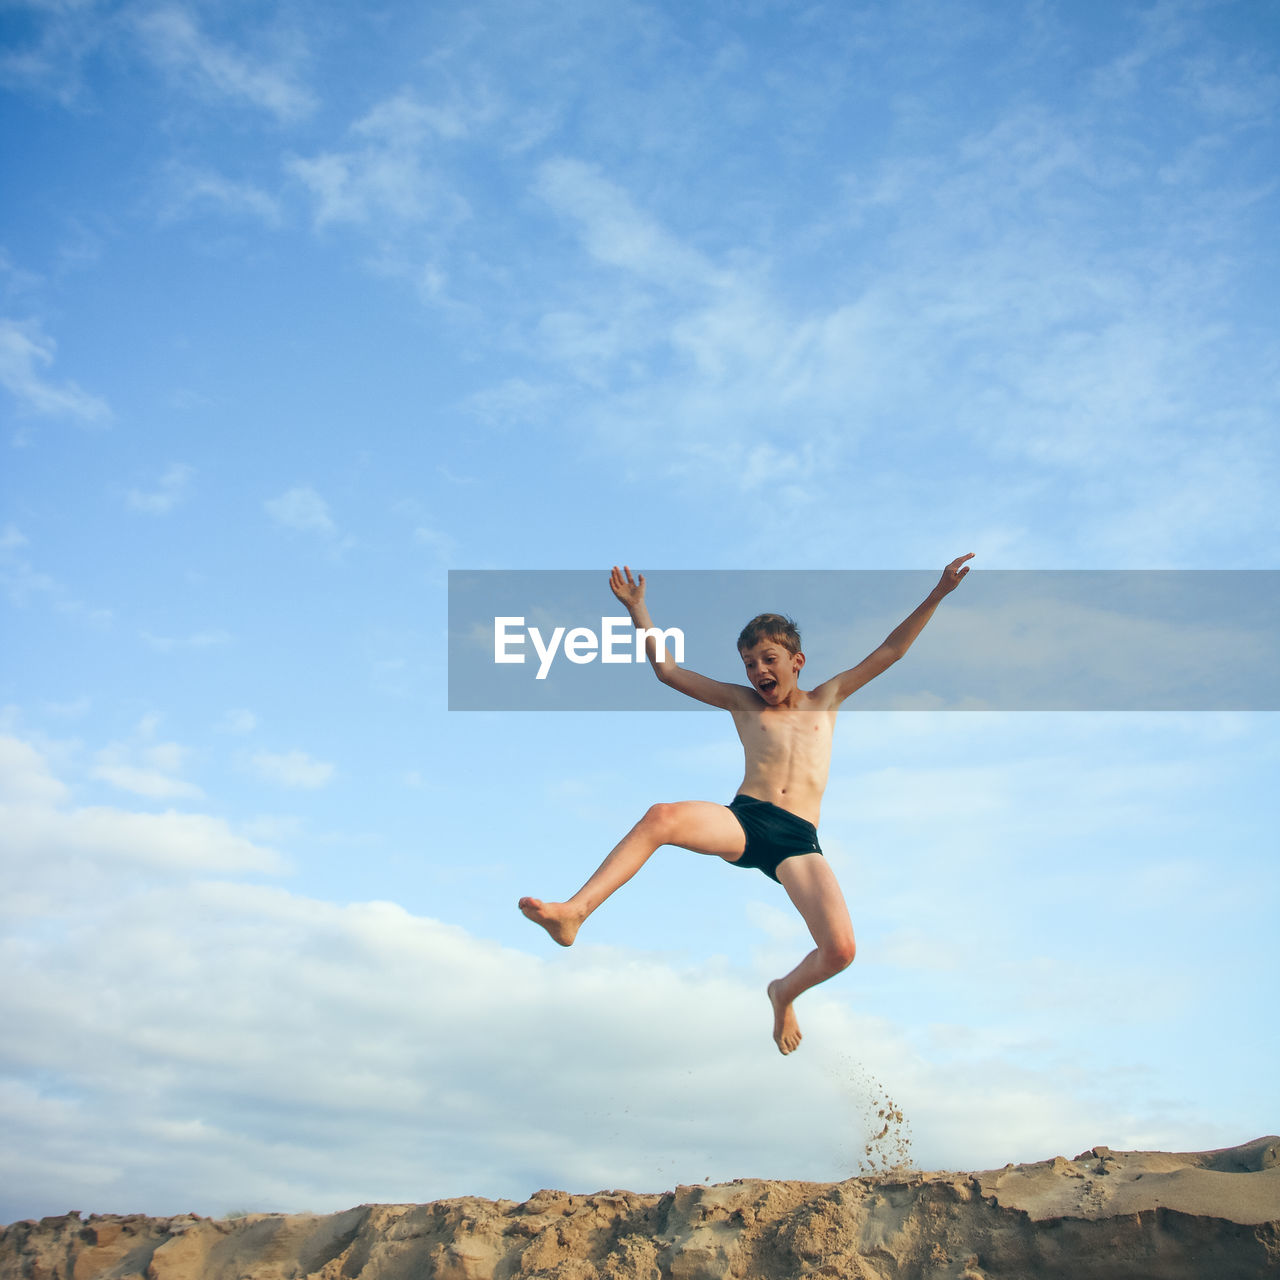 Low angle view of boy jumping against sky